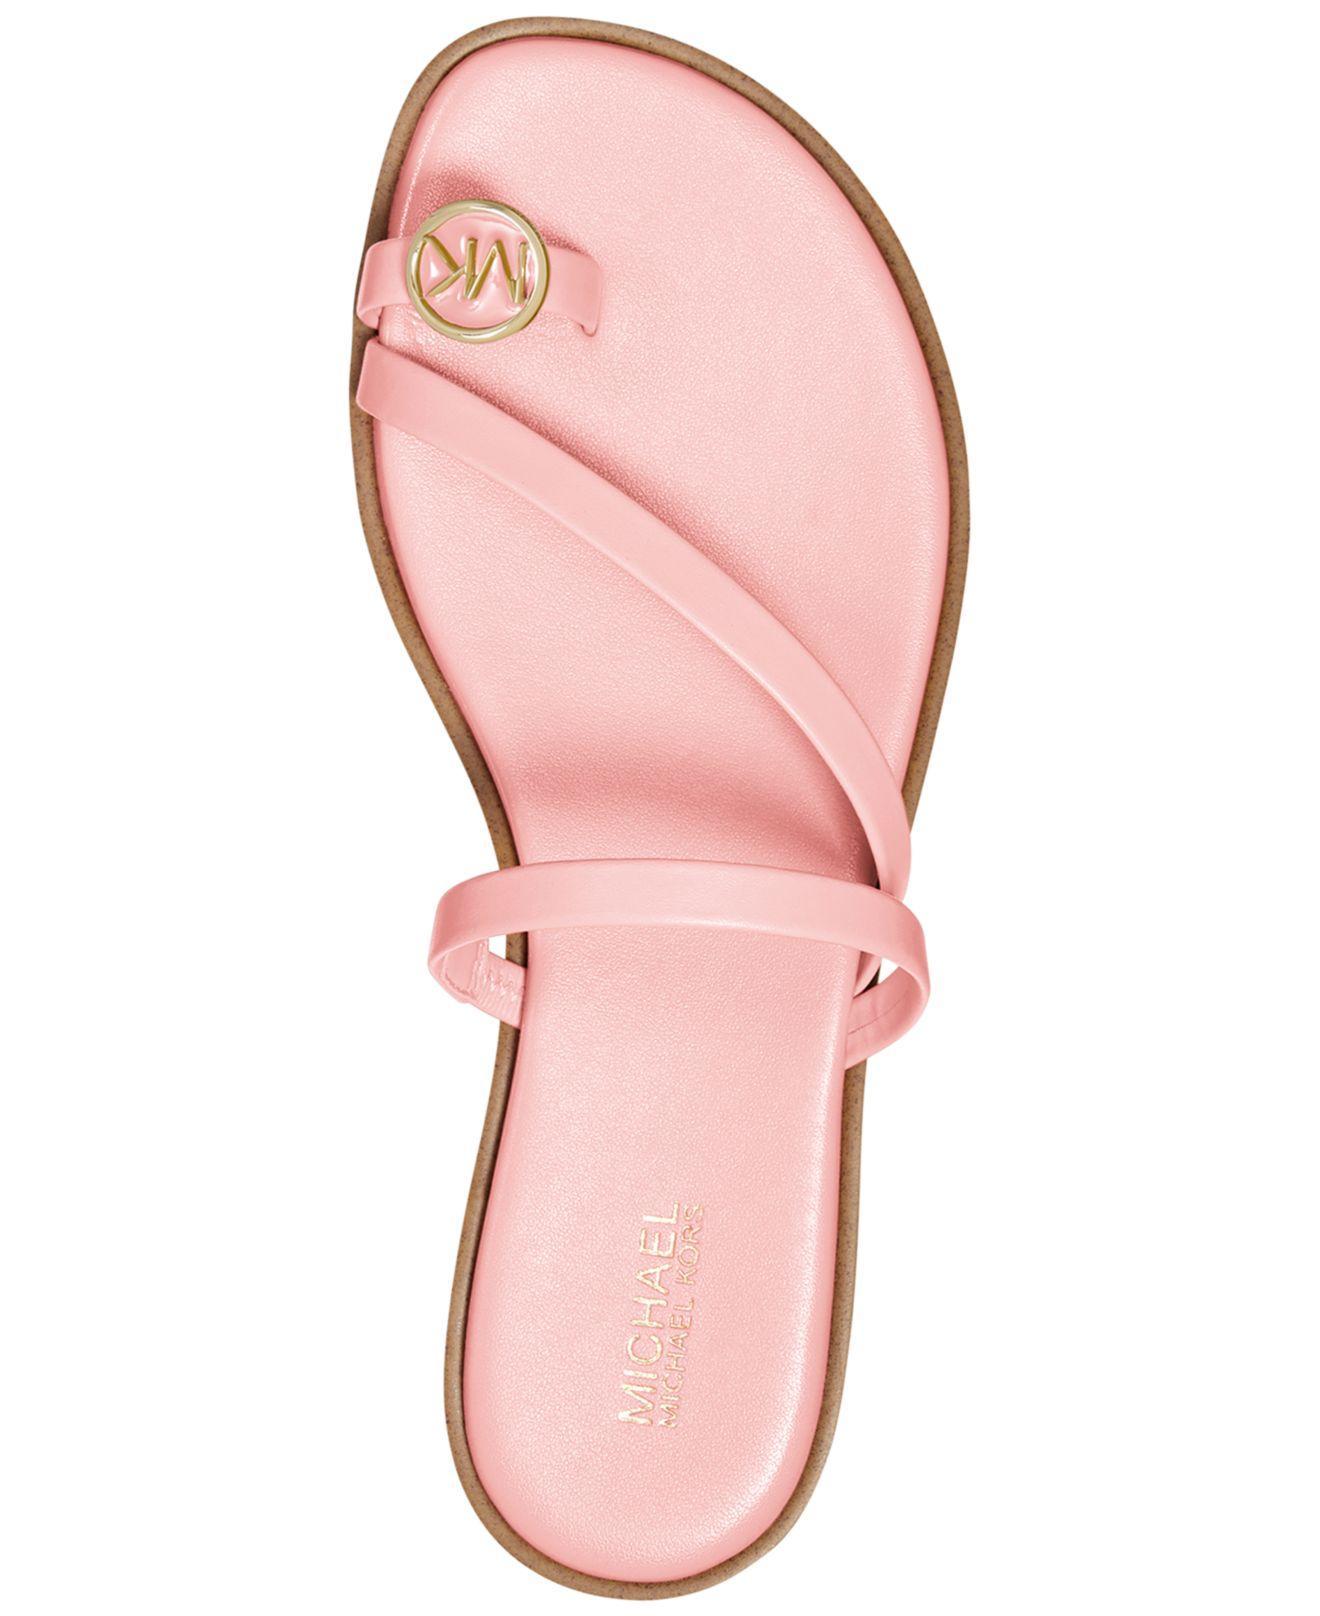 Michael Kors Leather Kors Letty Thong Sandals in Pink - Lyst